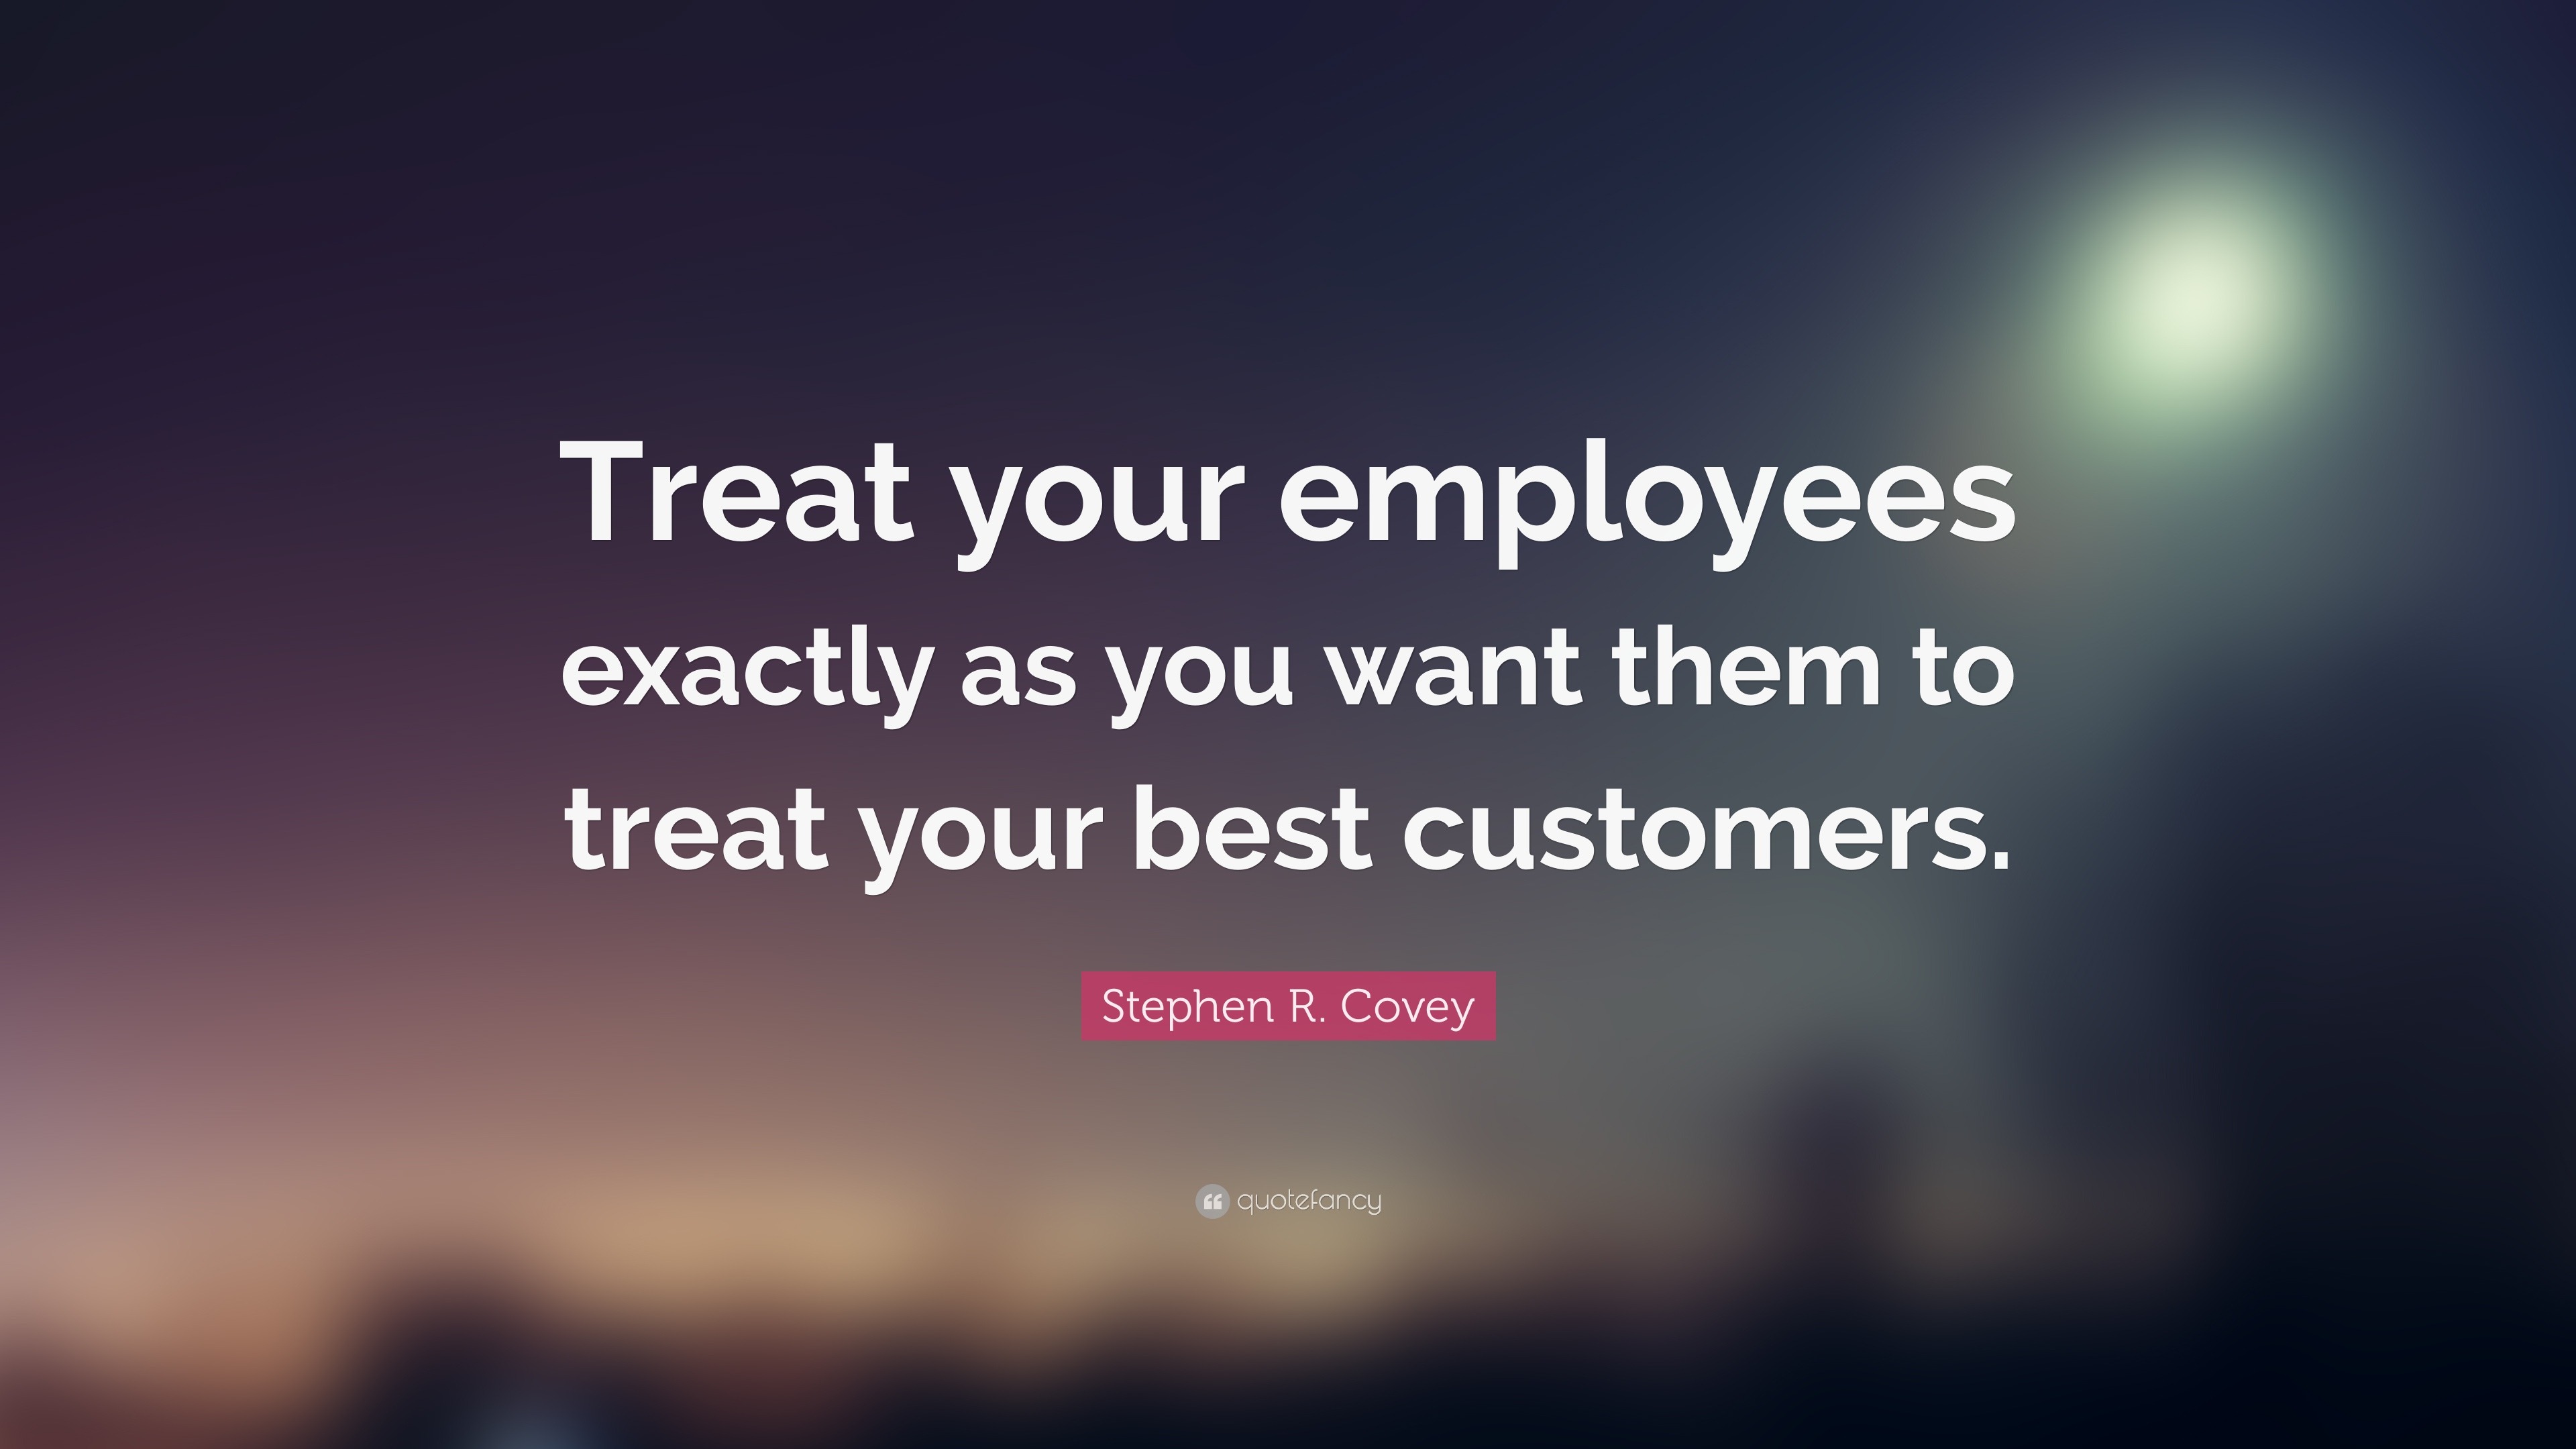 21183 Stephen R Covey Quote Treat your employees exactly as you want